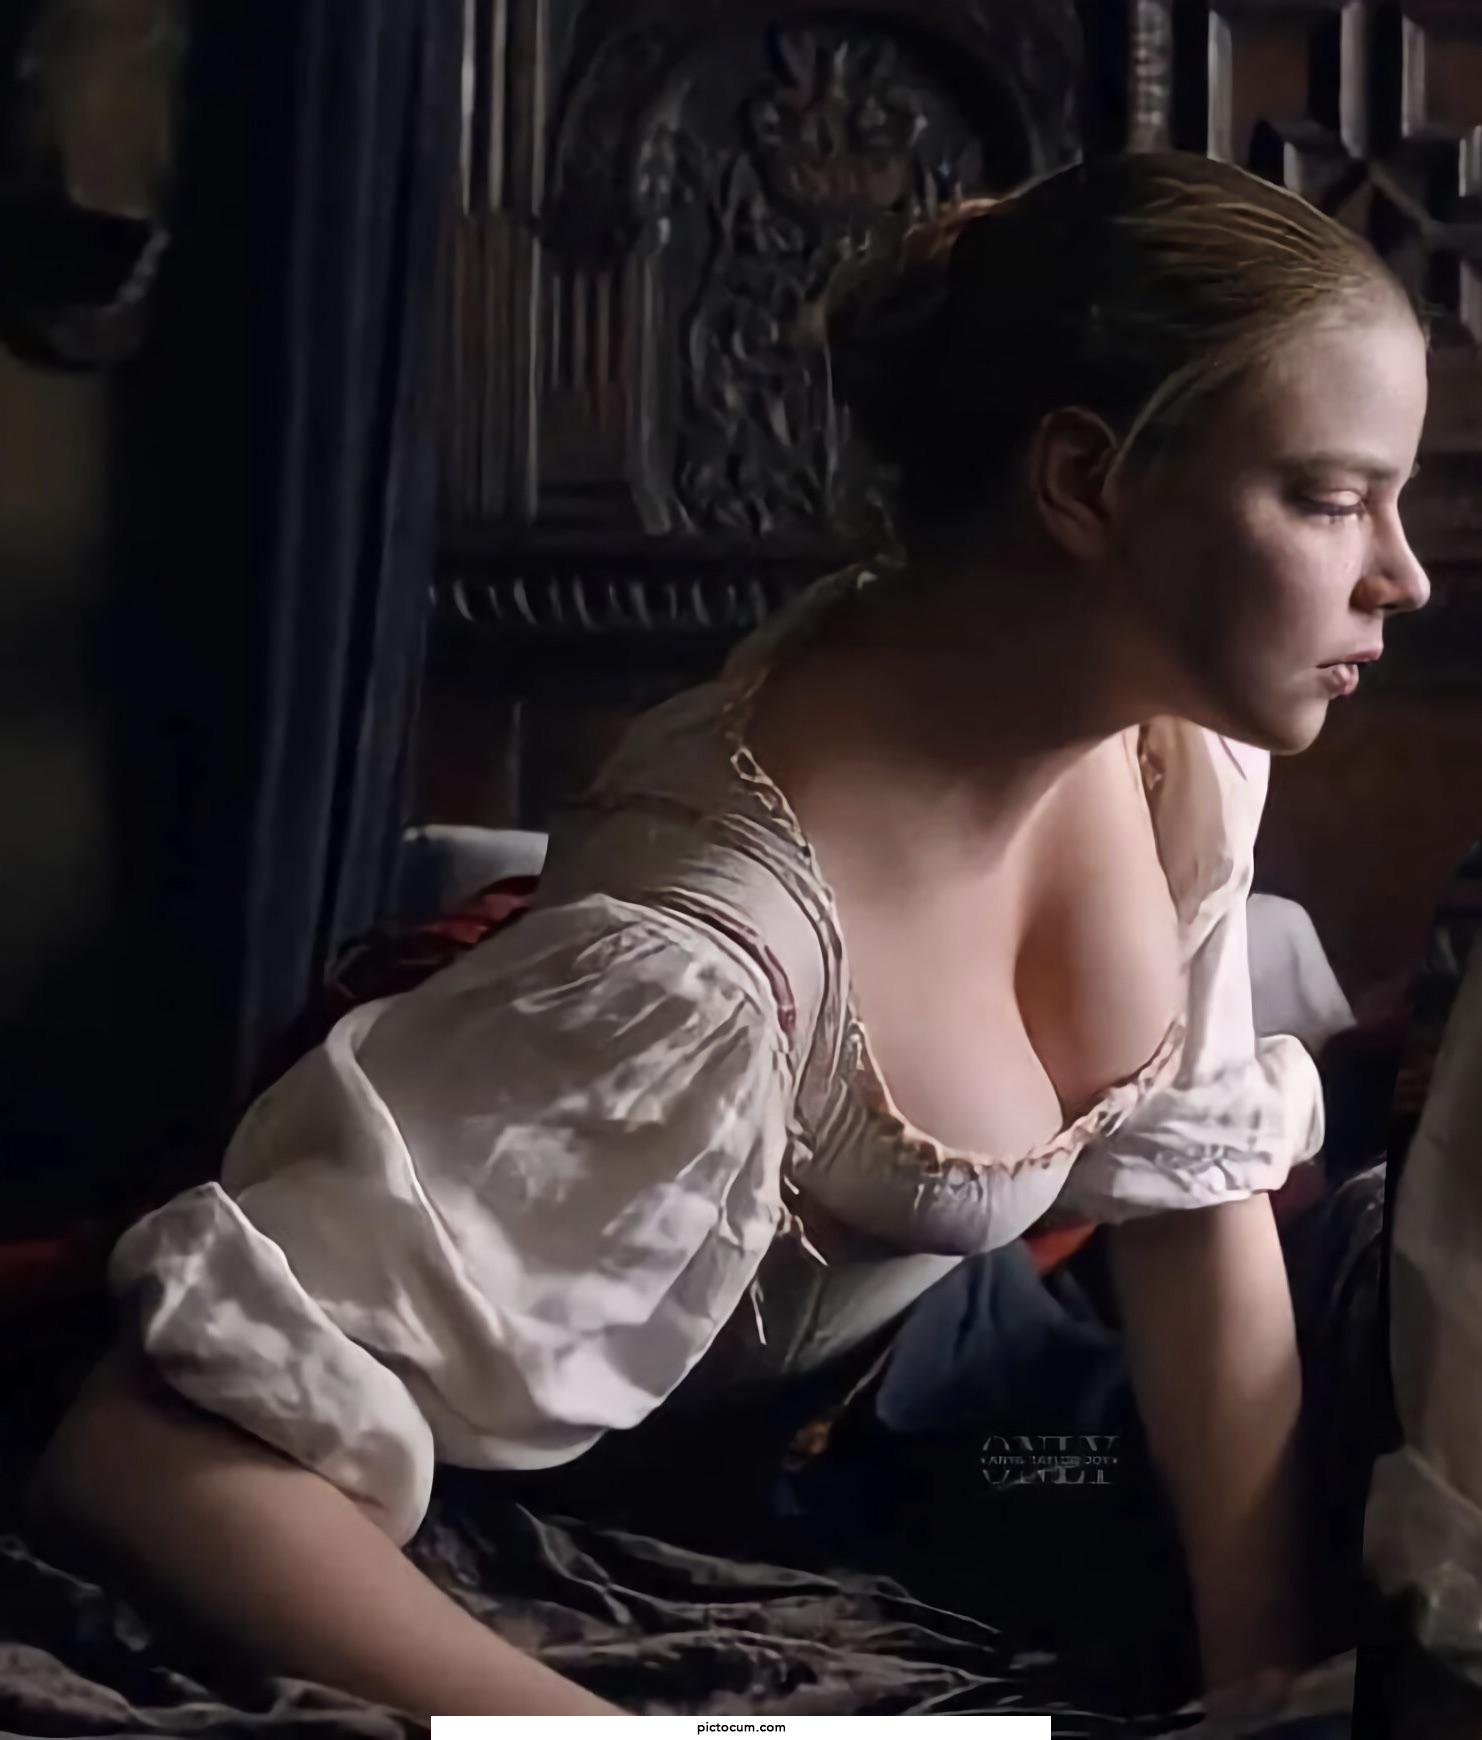 Anya Taylor Joy’s super subtle cleavage in ‘The Miniaturist’